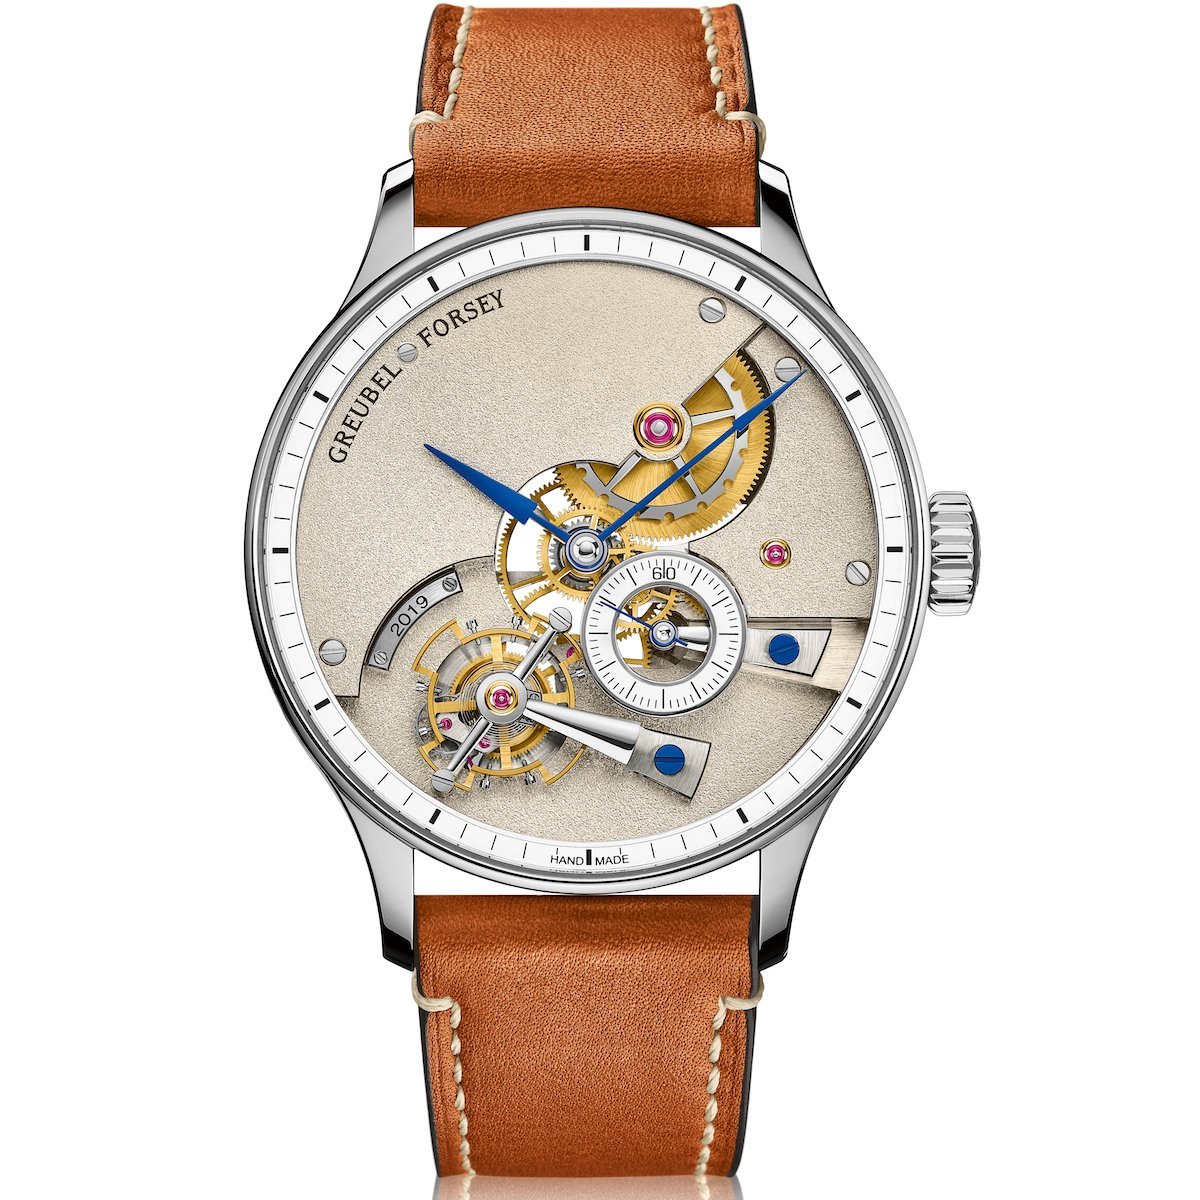 Hand Made 1, Greubel Forsey